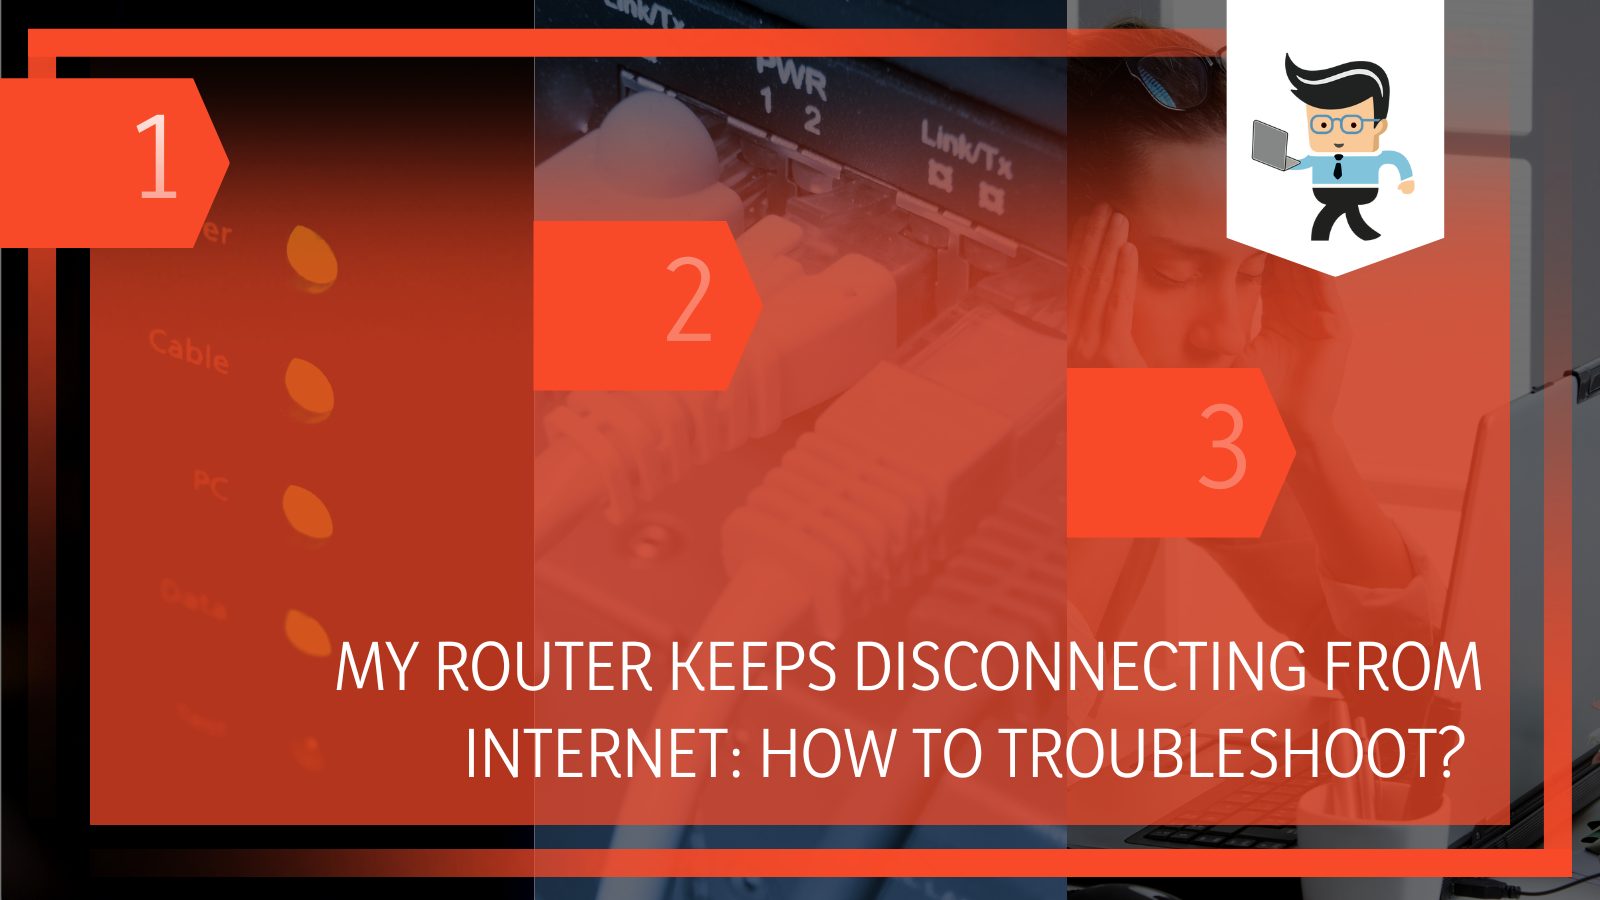 Asus Router Keeps Disconnecting from Internet